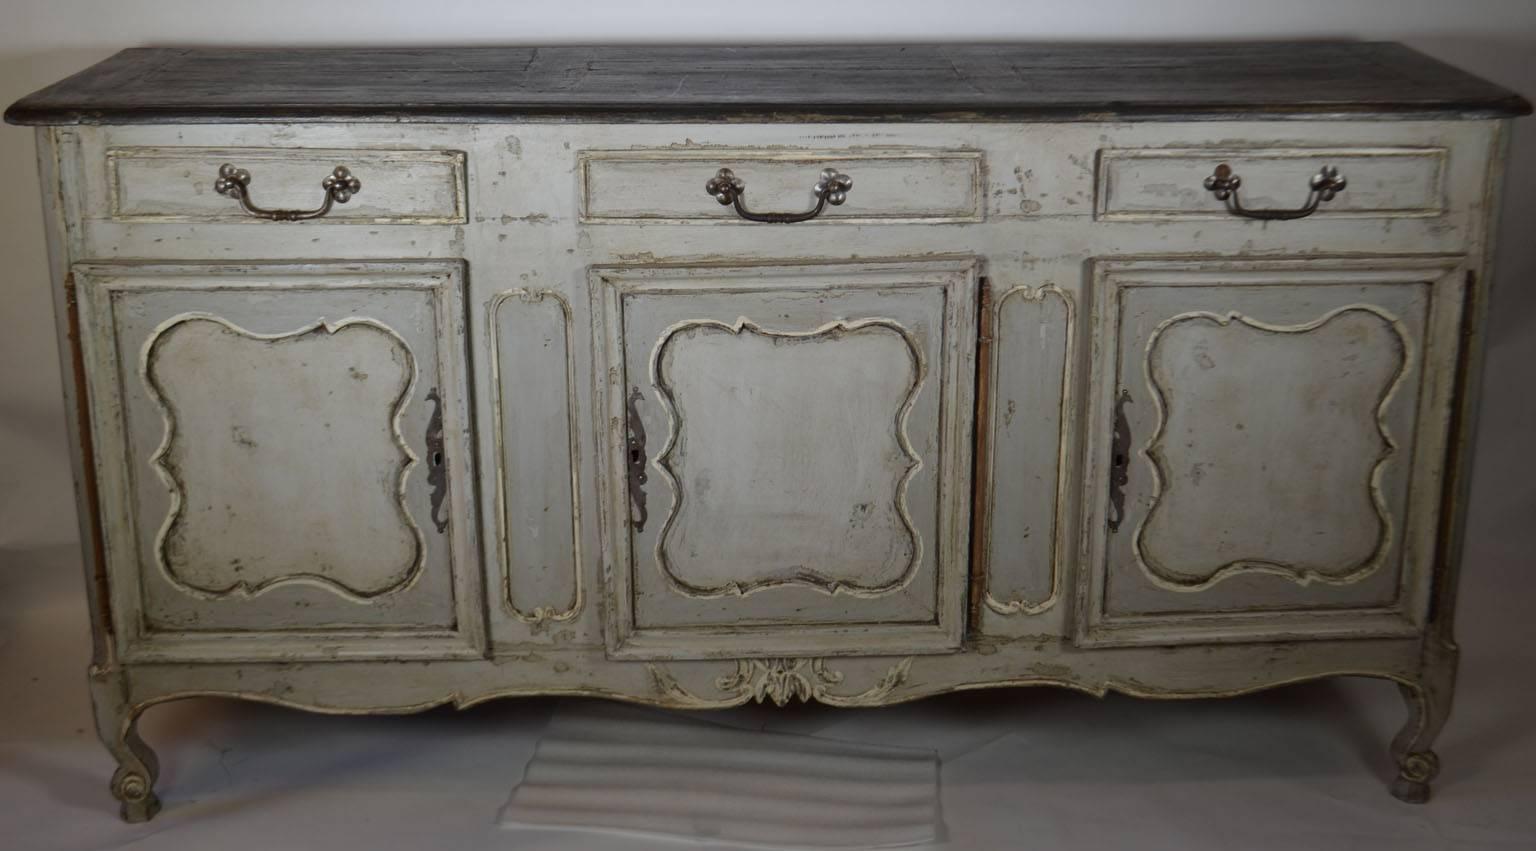 Late 19th century Louis XV style enfilade. Measures: 39